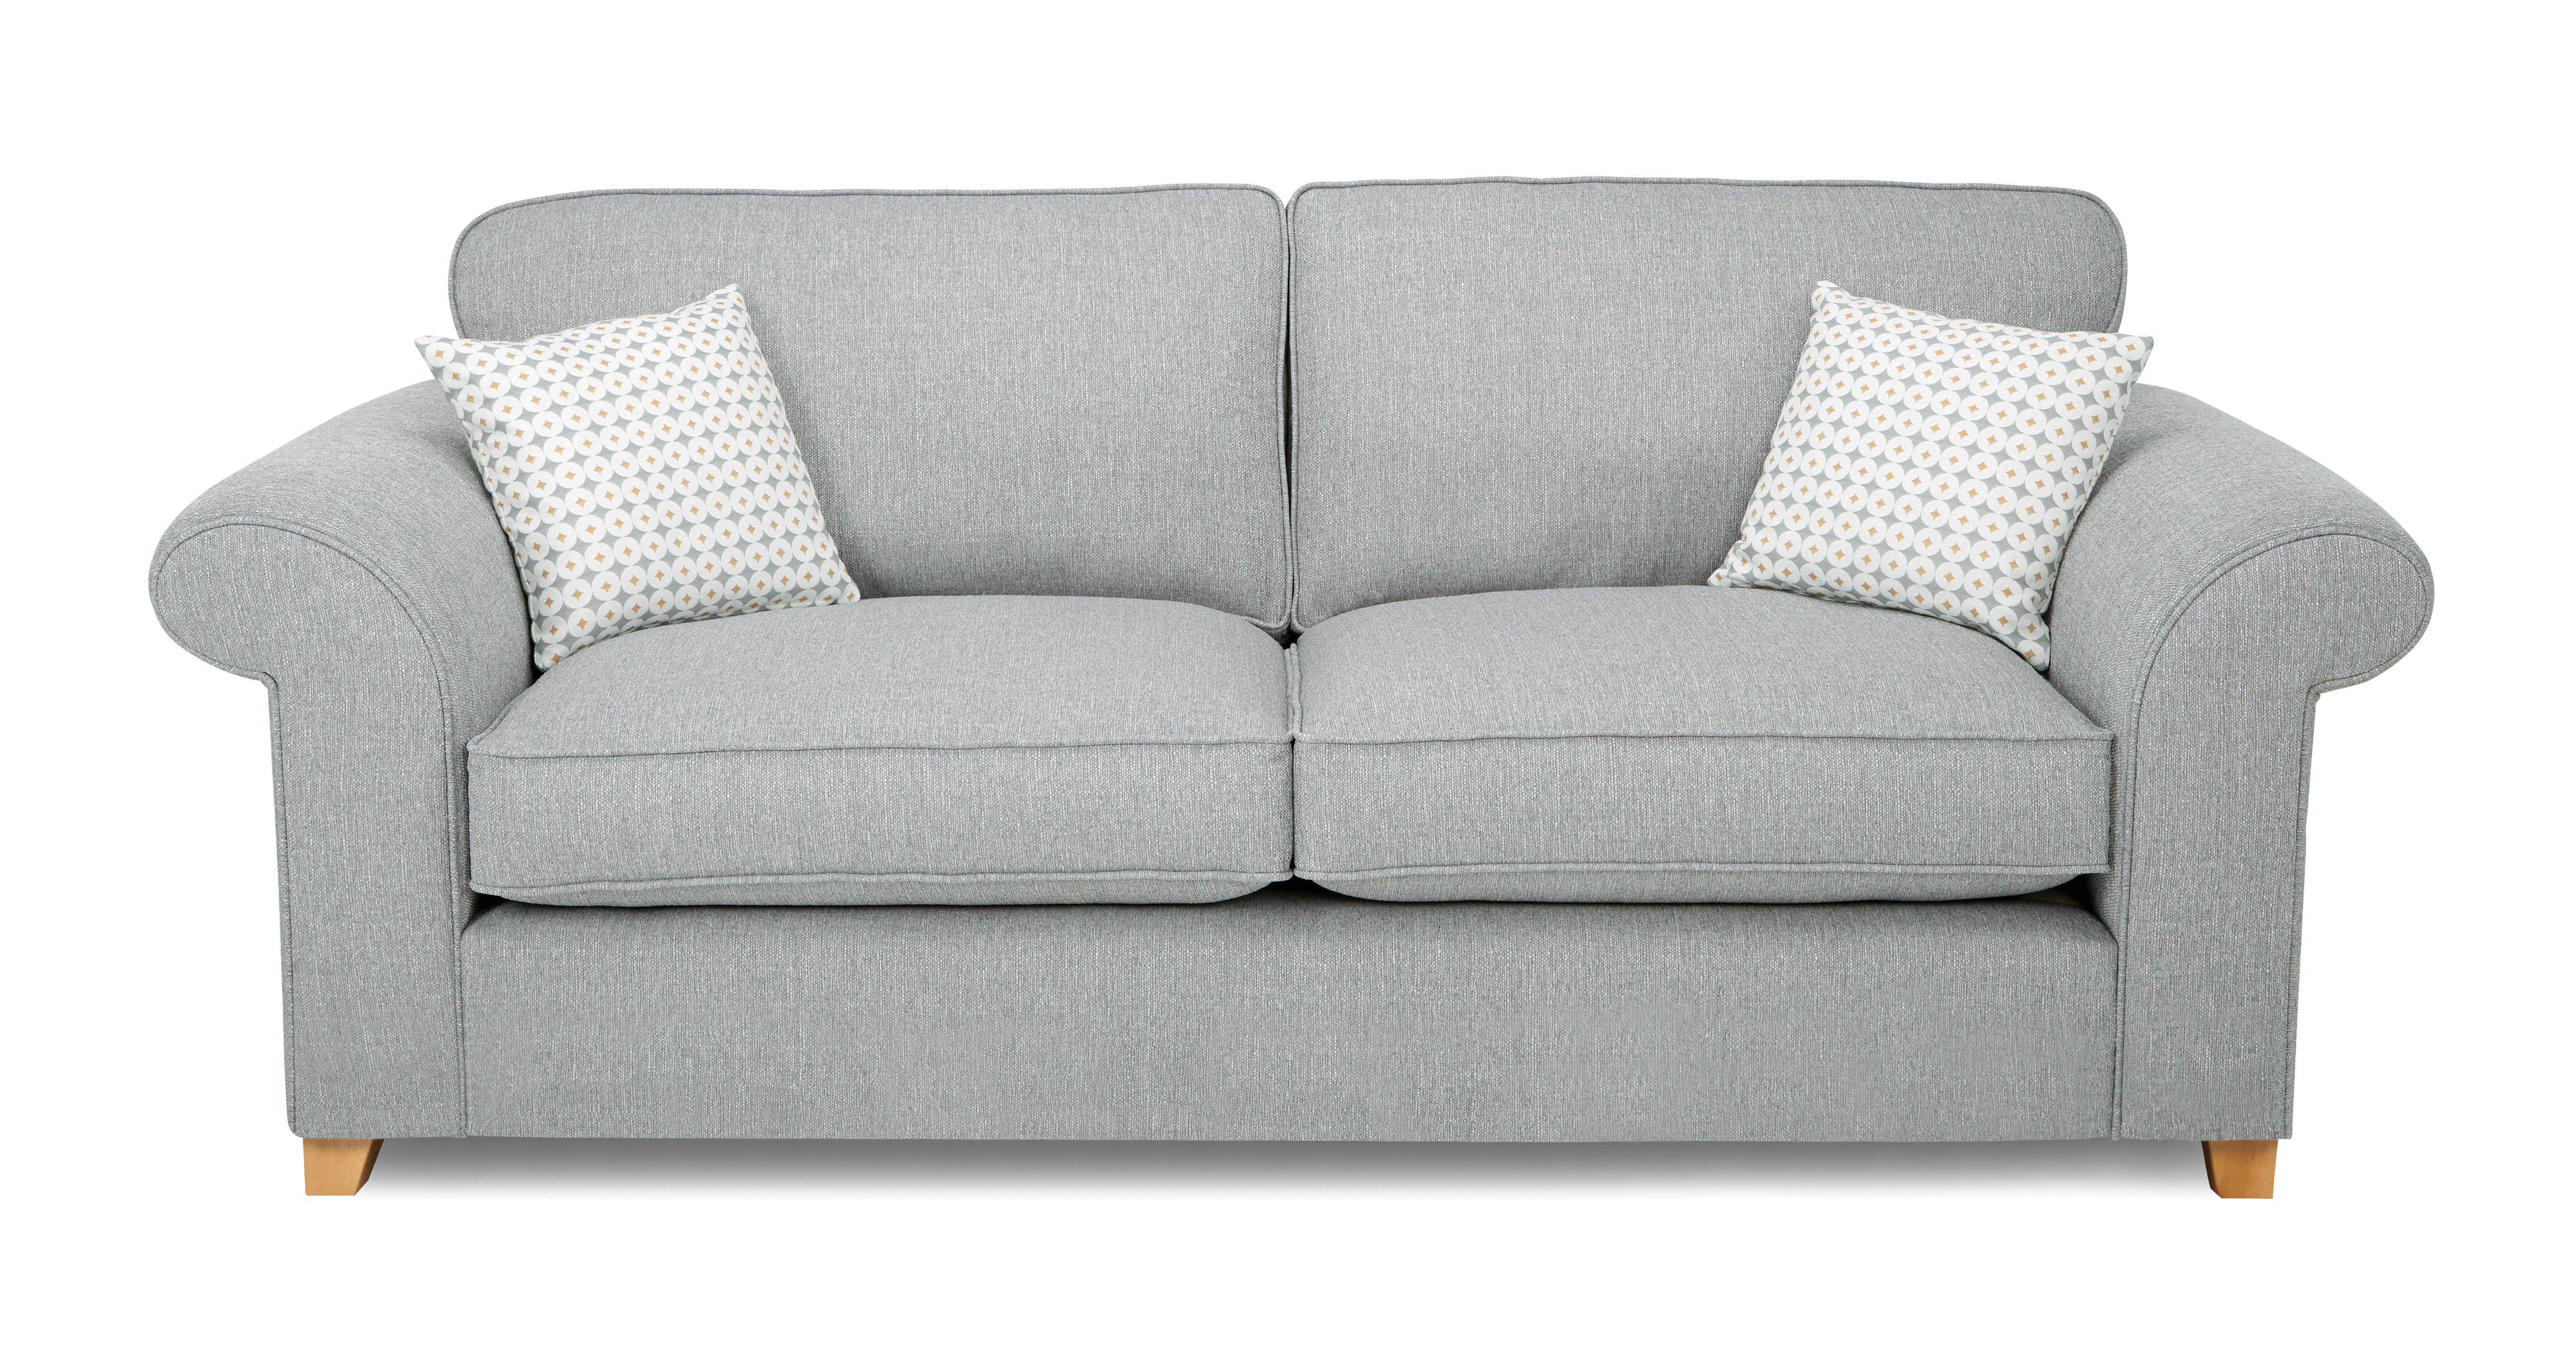 dfs sofa bed removable arms